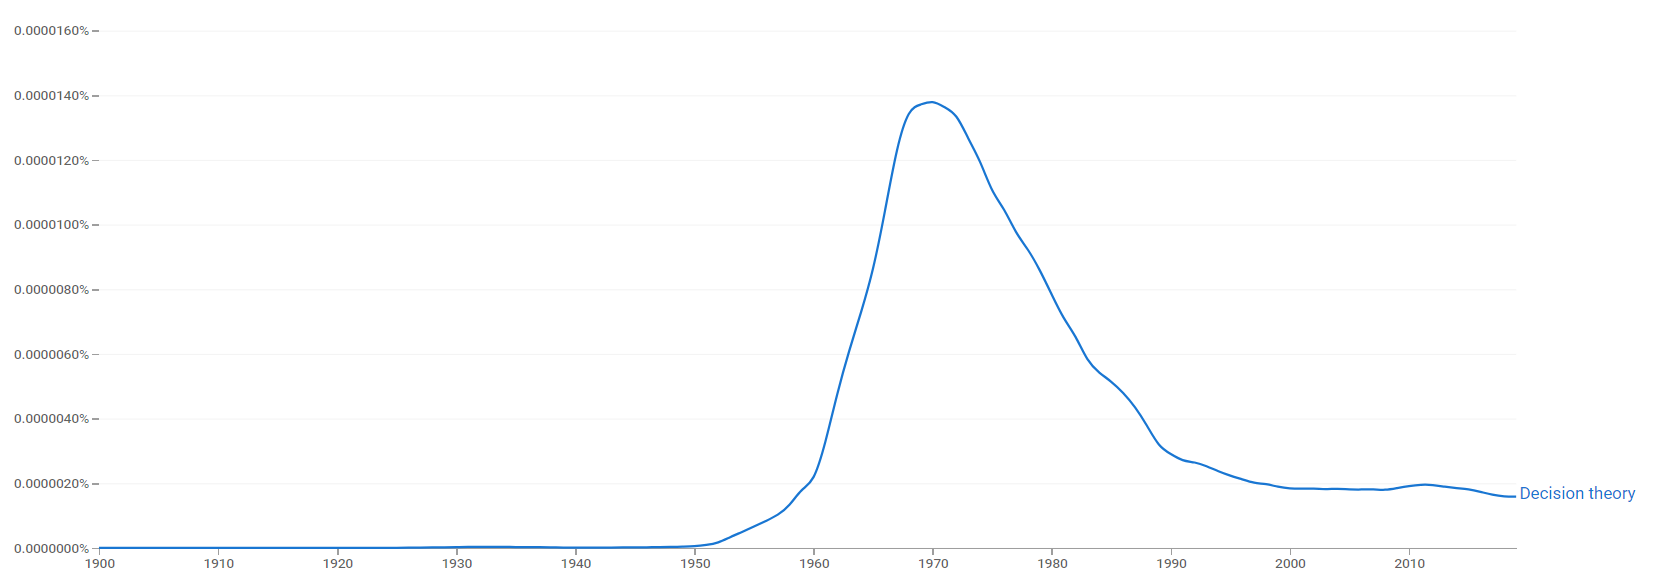 Decision theory ngram.png